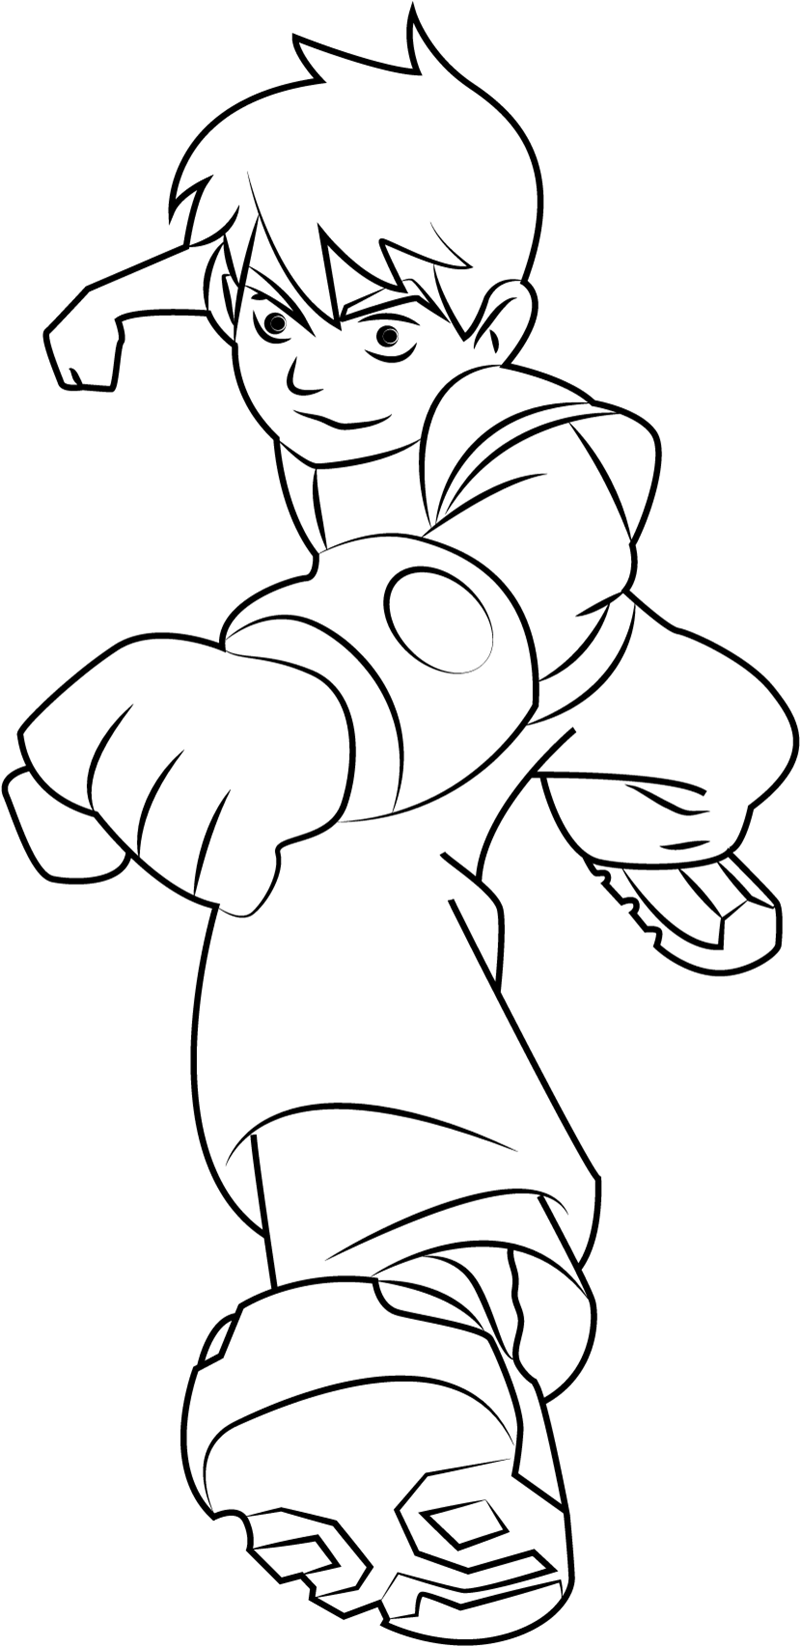 Anime Running Coloring Page